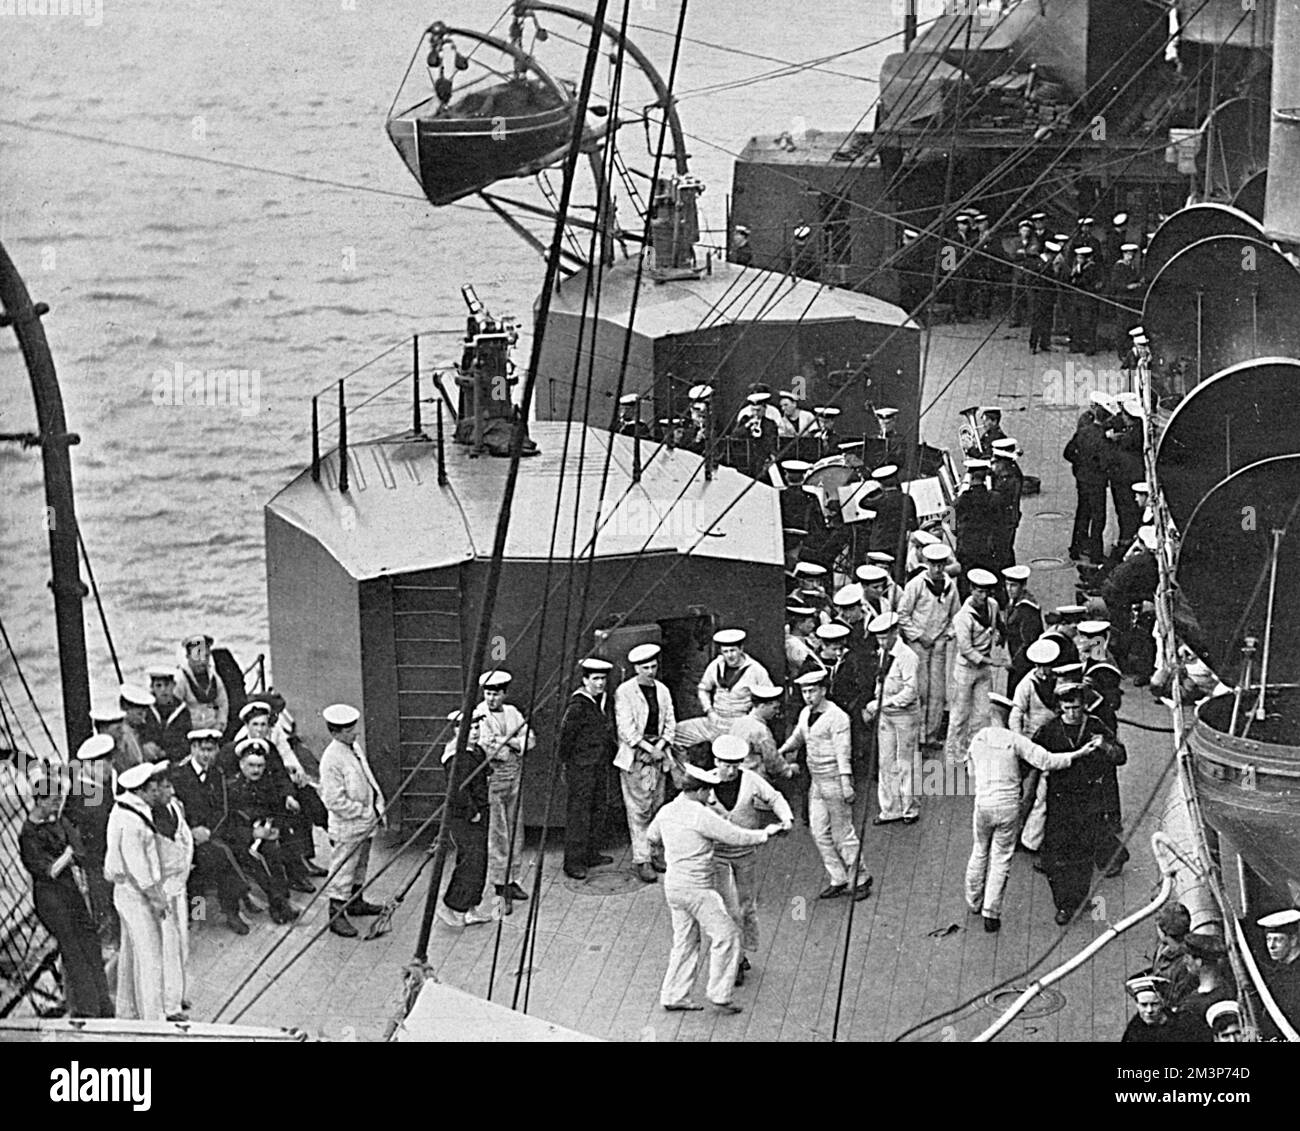 Jack's leisure hour in war-time enlivened by the strains of the ship's band.  British sailors on an unidentified ship enjoy relax on board by dancing.      Date: 1916 Stock Photo